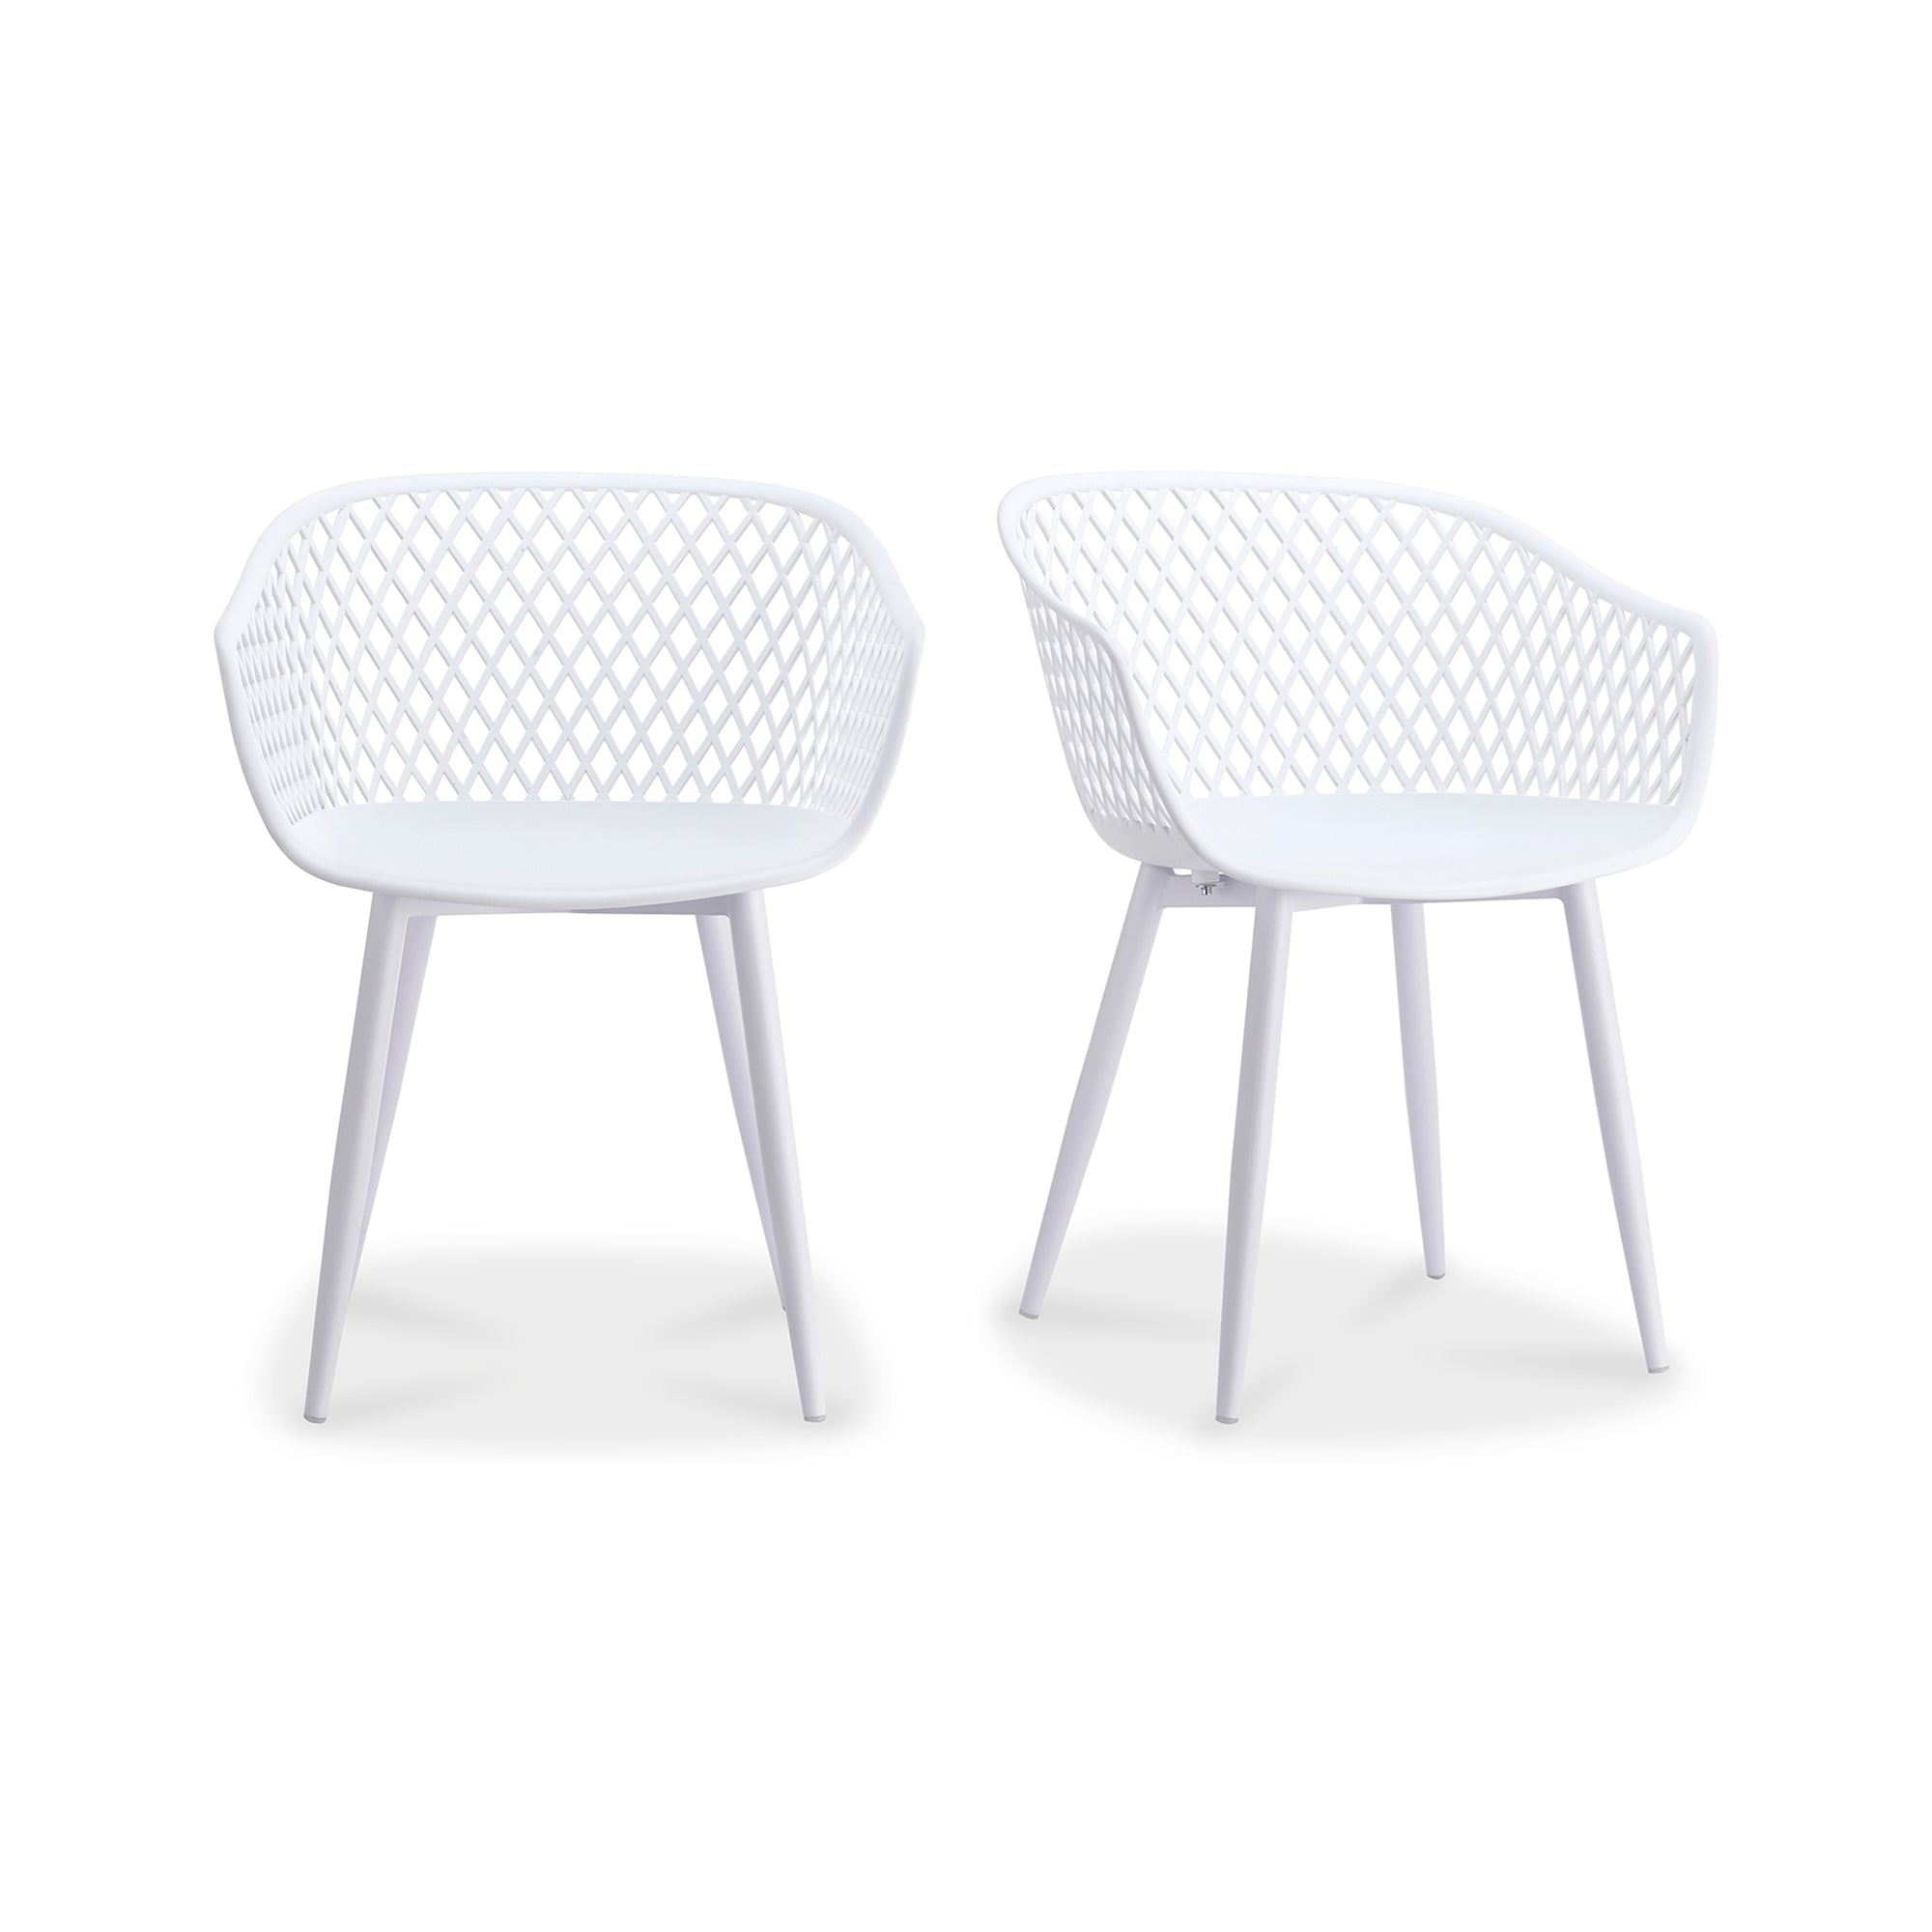 Piazza Outdoor Chair White - Set Of Two | White